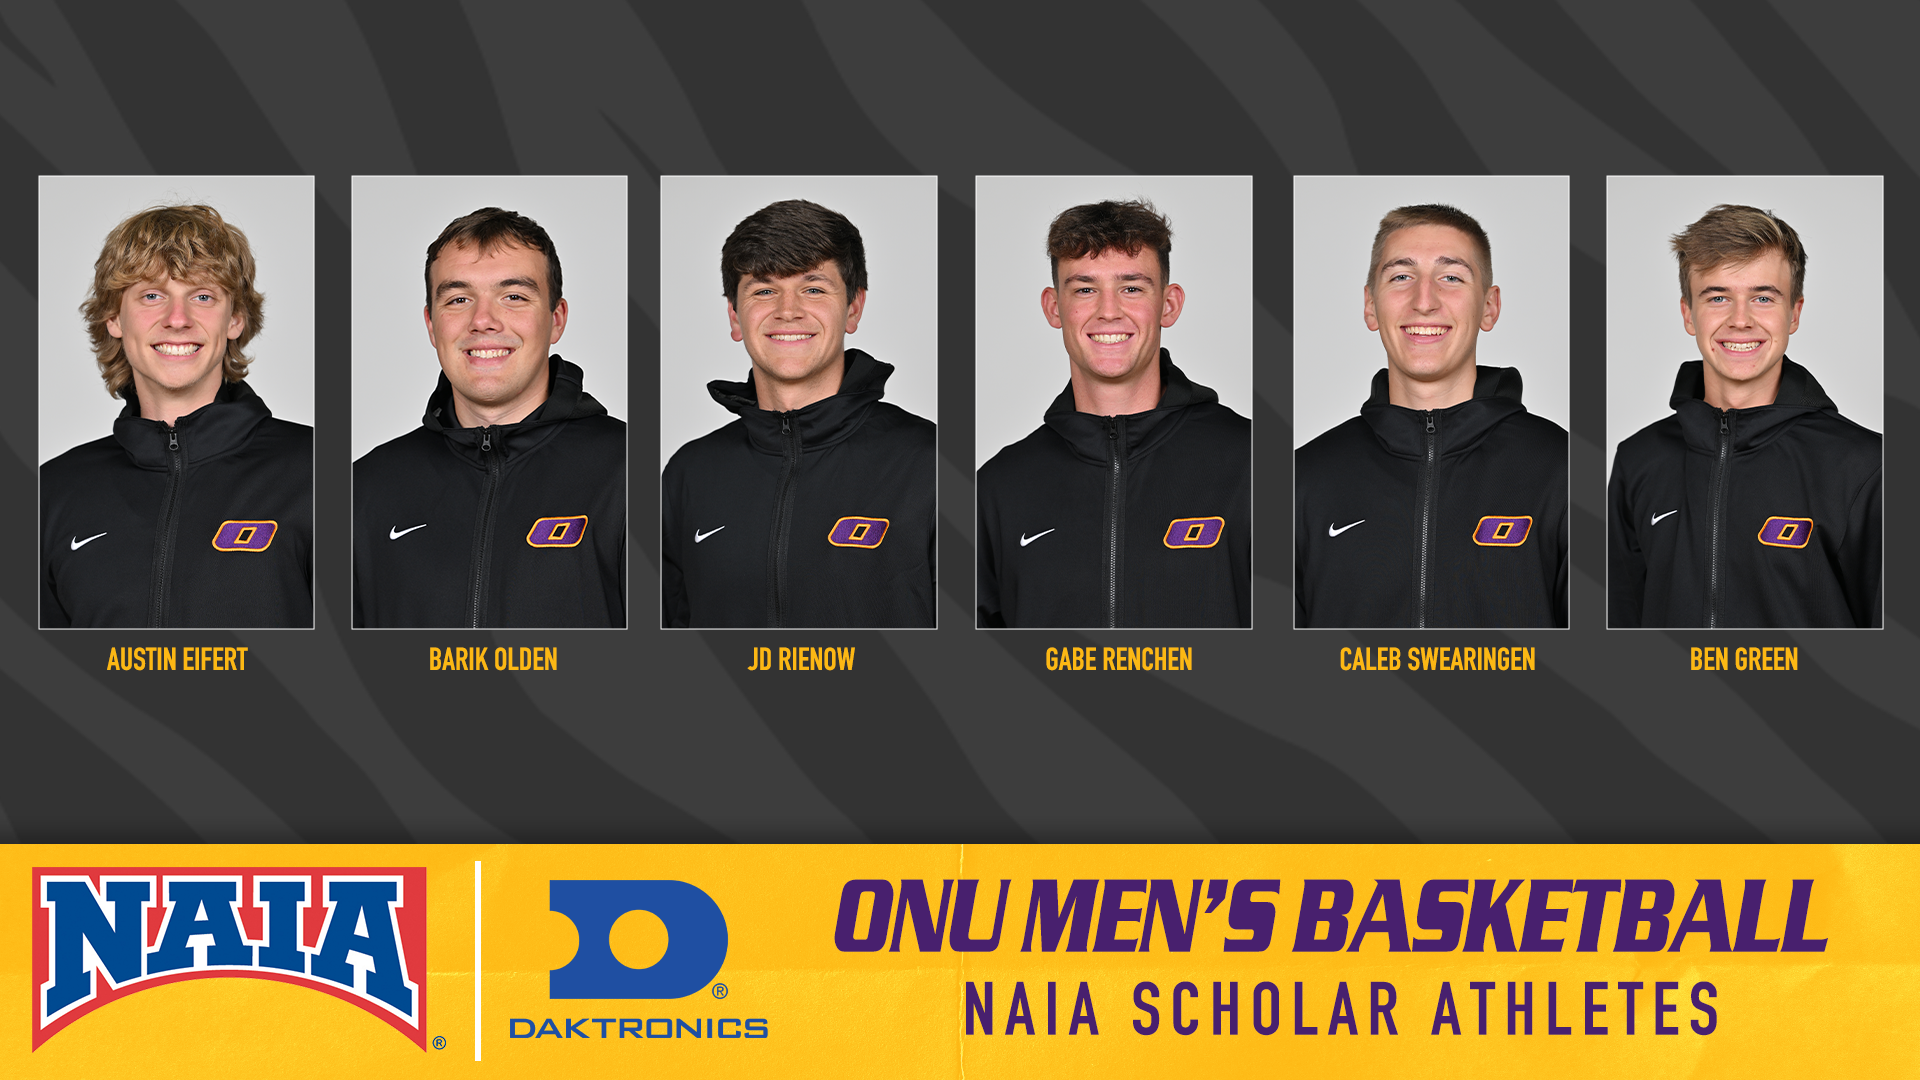 SIX TIGERS NAMED NAIA SCHOLAR-ATHLETES FROM ONU MEN’S BASKETBALL